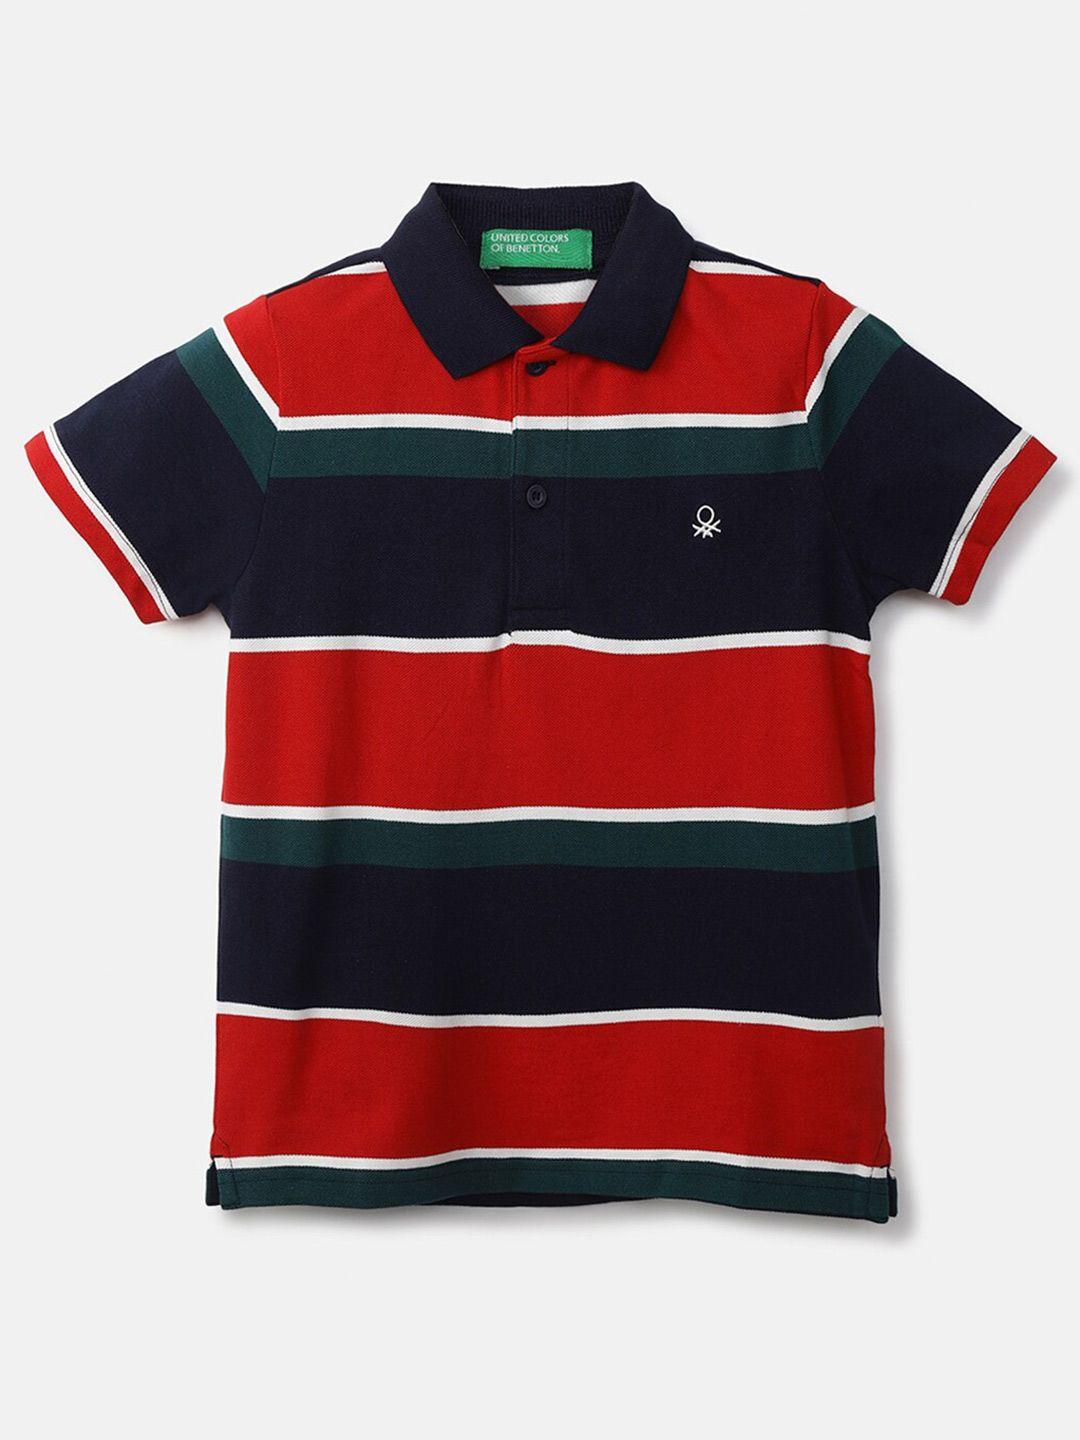 united colors of benetton boys red & black striped polo collar cotton t-shirt